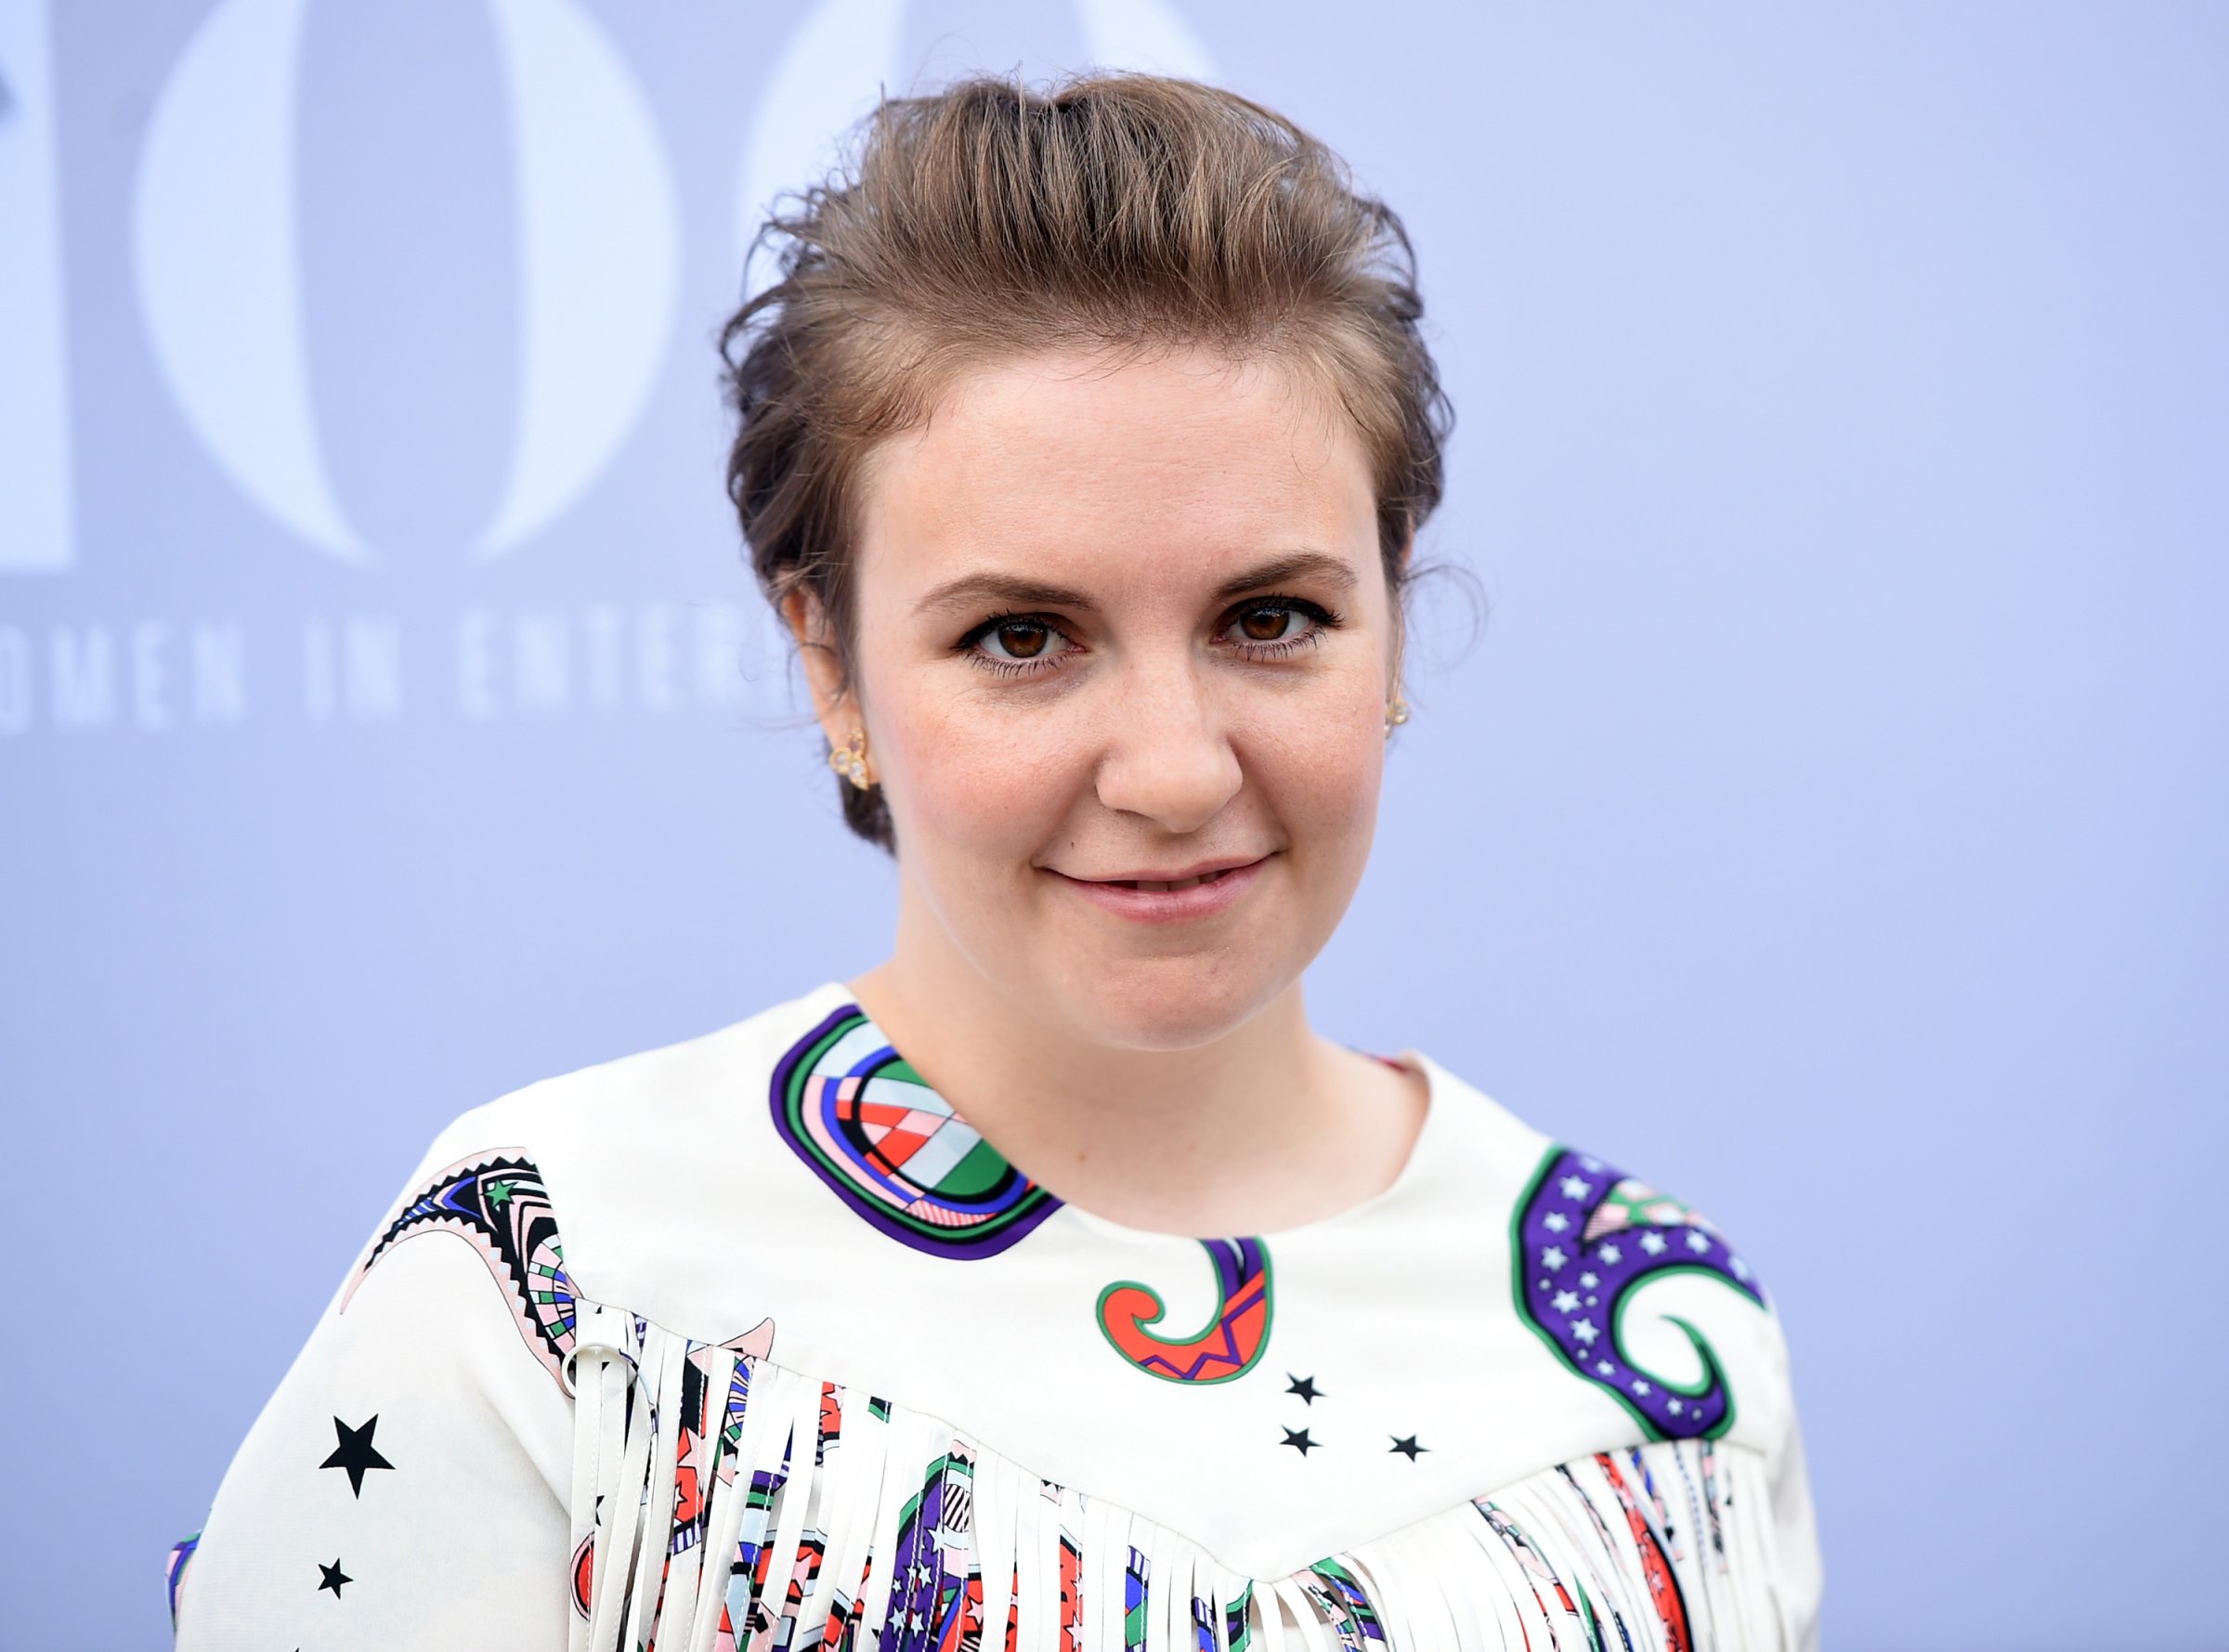 Honoree Lena Dunham attends the 24th annual Women in Entertainment Breakfast hosted by The Hollywood Reporter at Milk Studios on December 9, 2015 in Los Angeles, California.